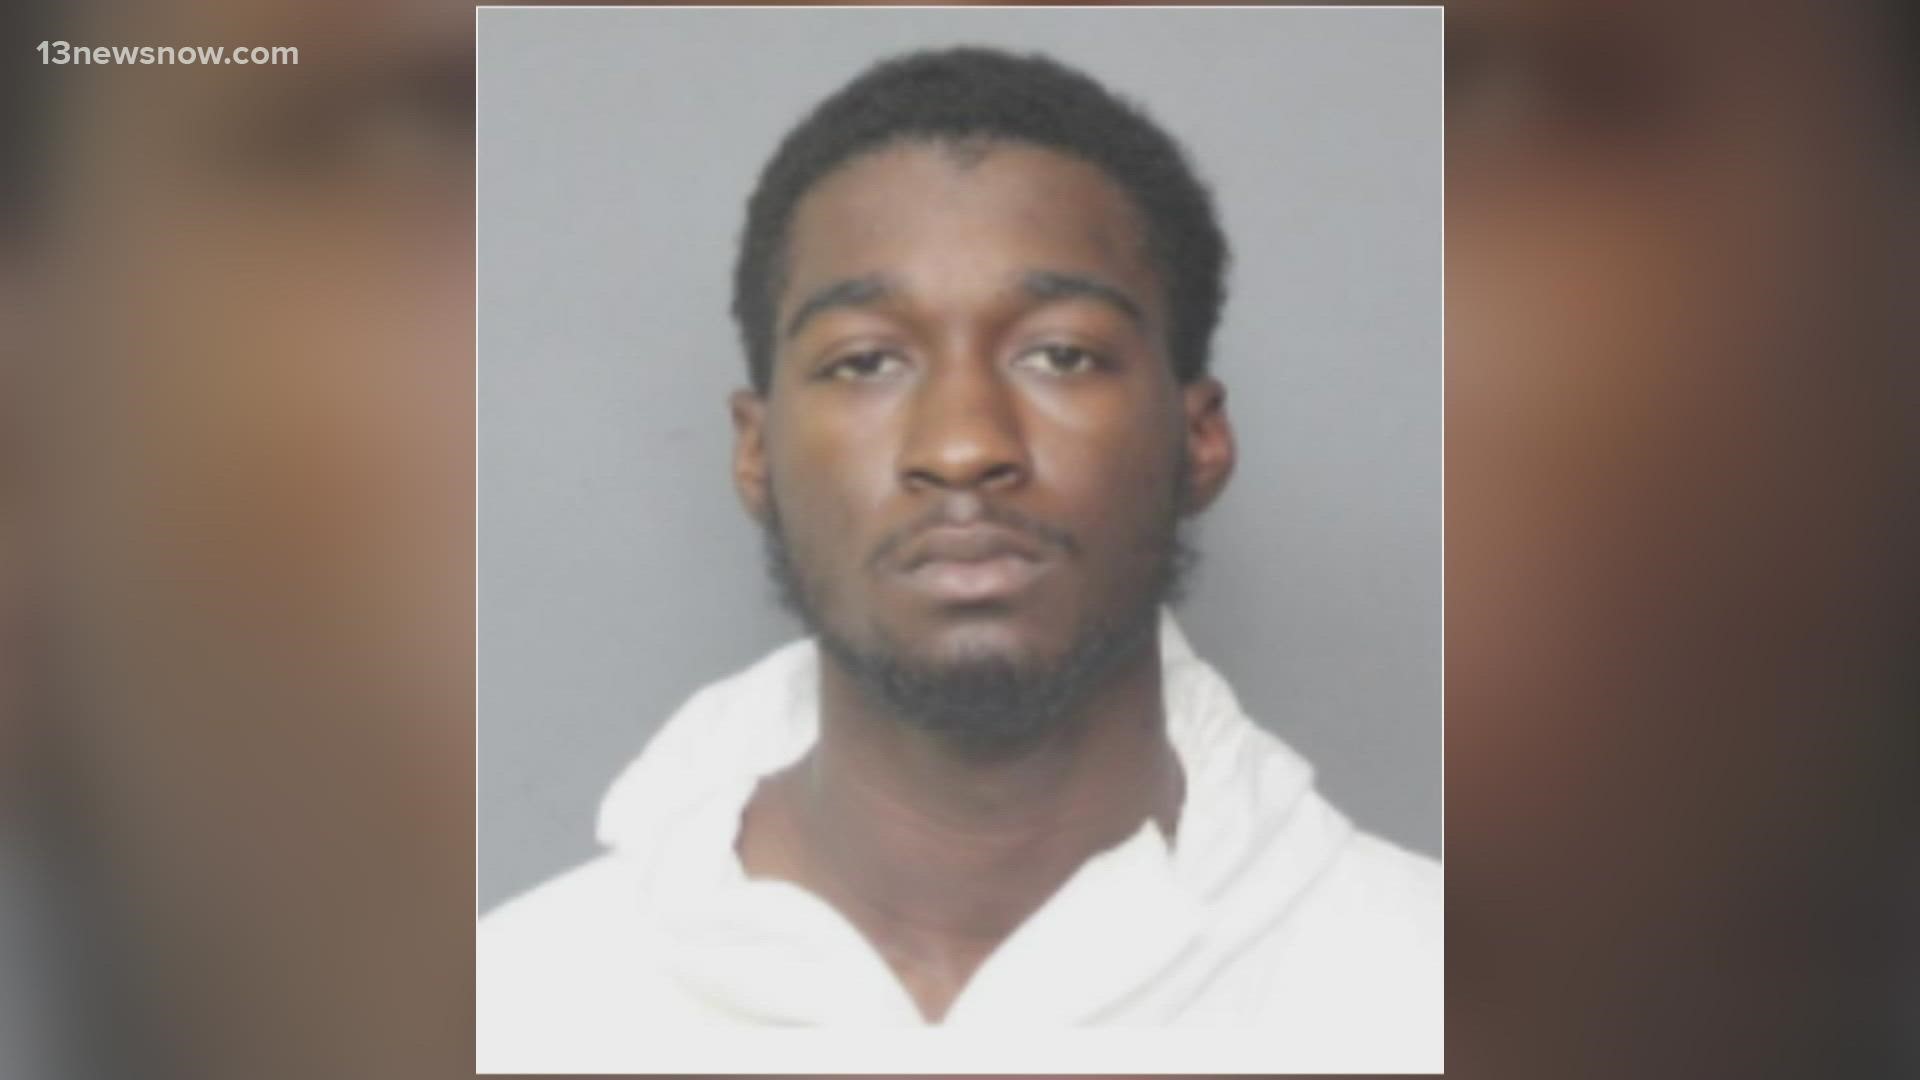 Three women were killed and two others were hurt in the Young Terrace neighborhood in November. Ziontay Palmer faces several charges in the shooting.